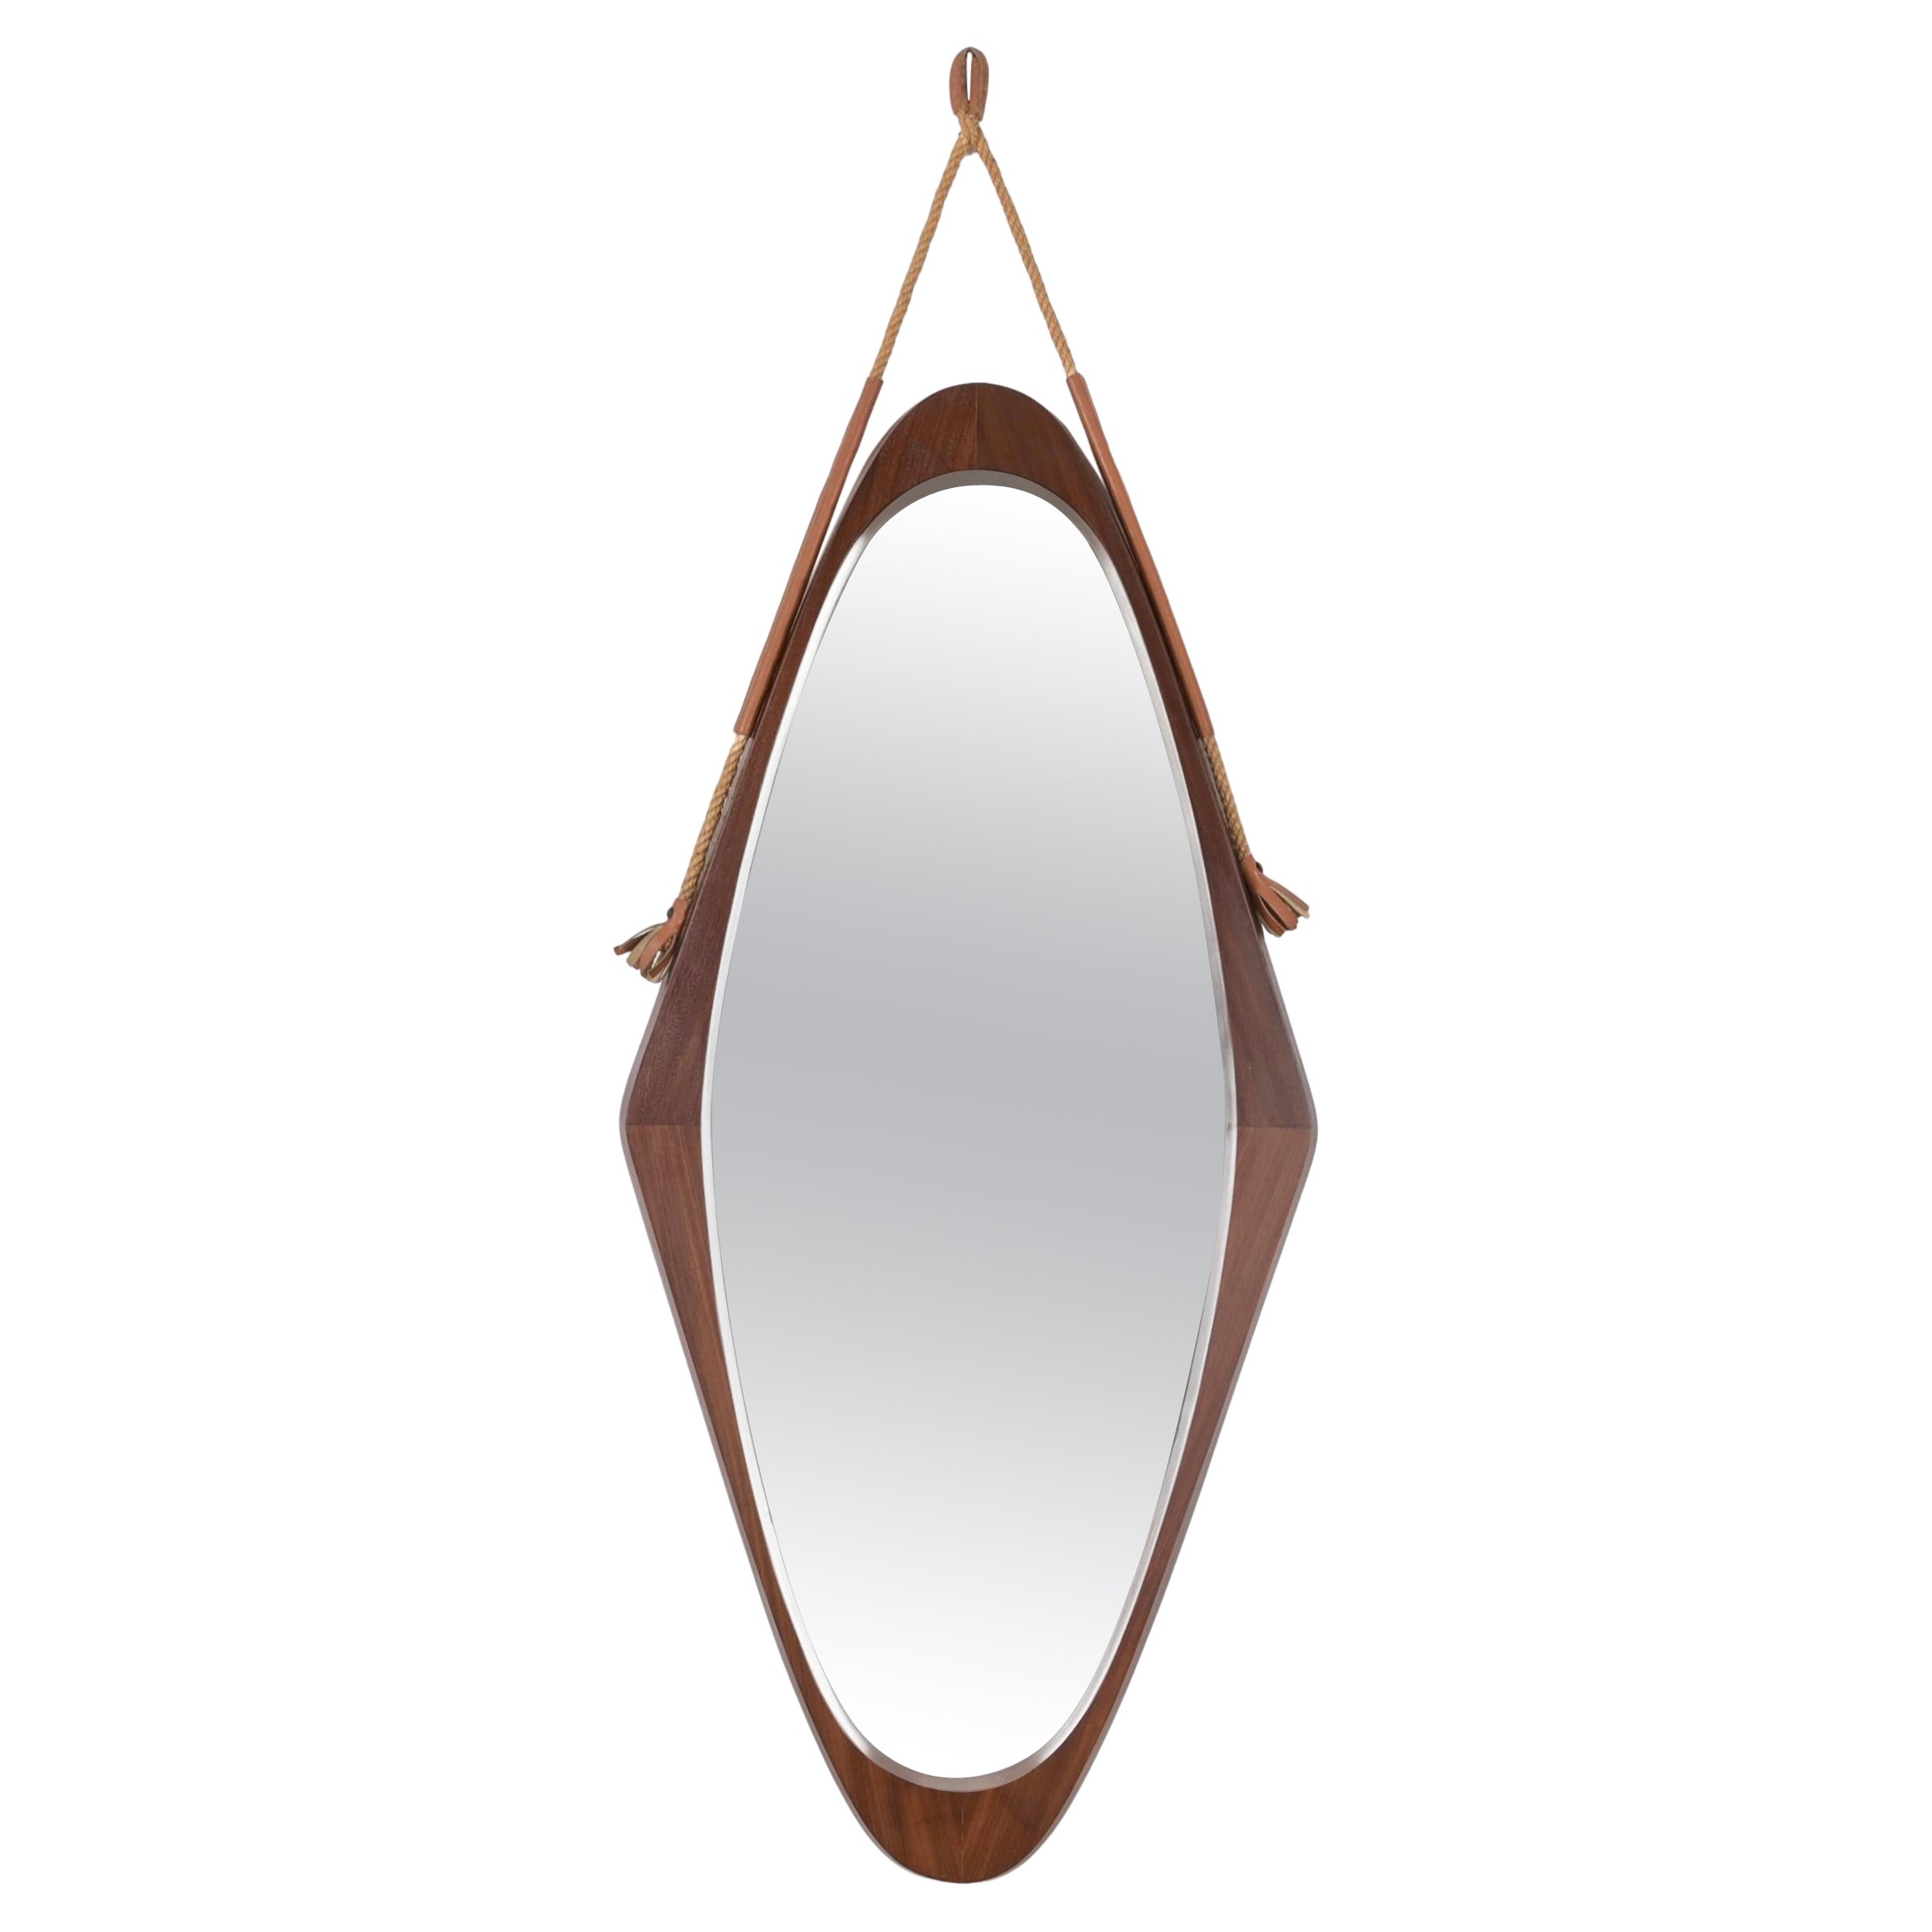 Midcentury Italian Oval "Shield" Mirror in Curved Teak, Rope and Leather, 1960s